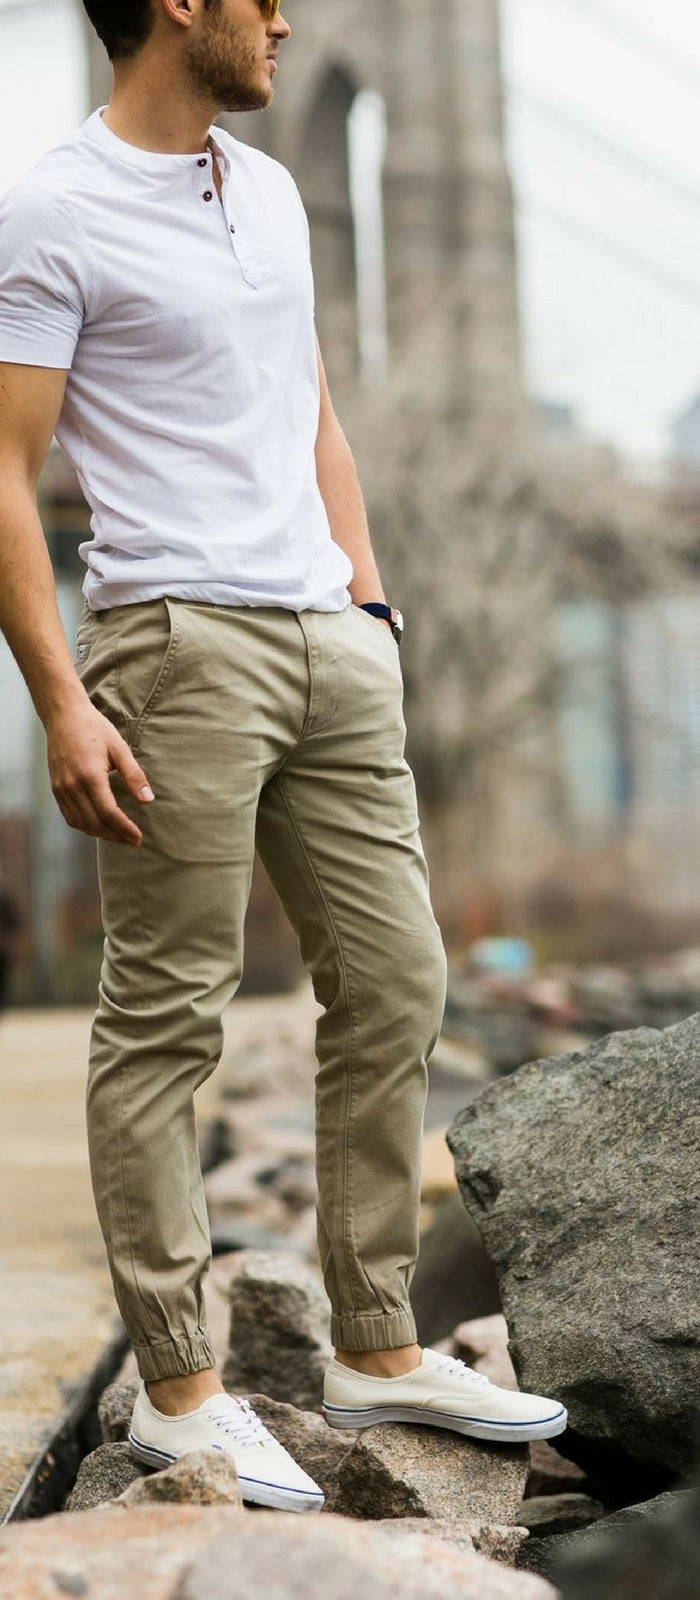 Joggers outfit ideas for men 